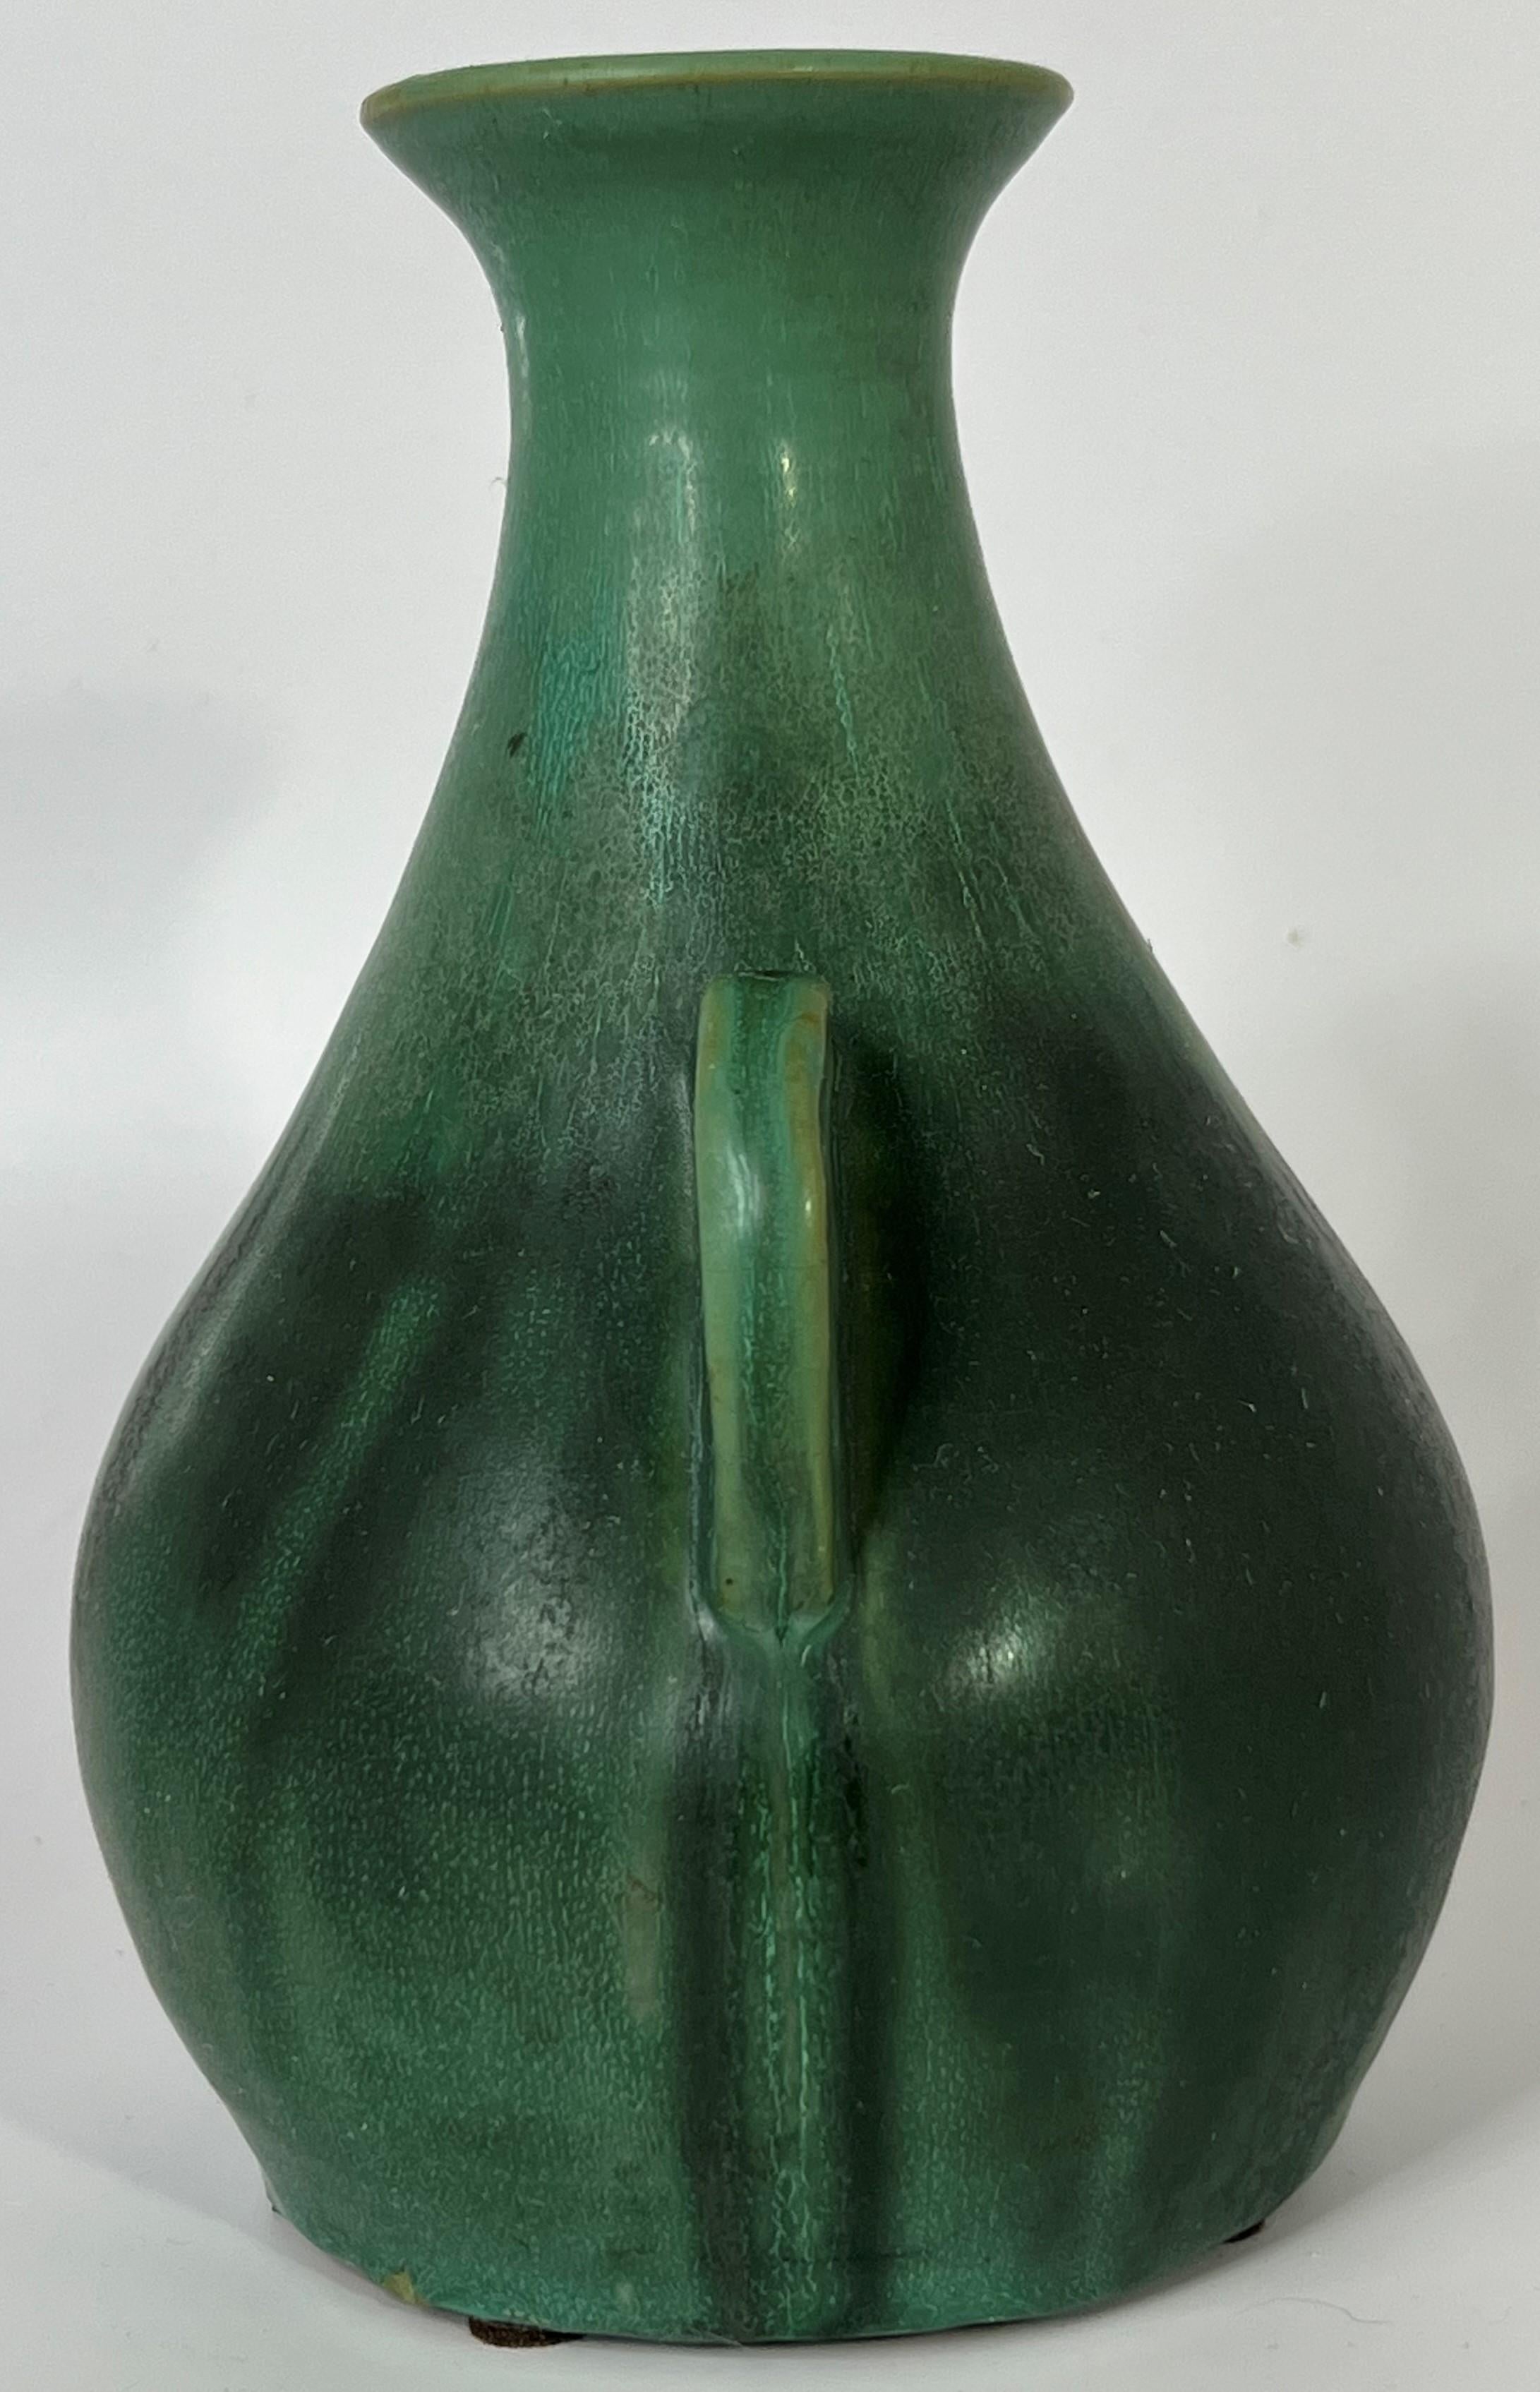 A scarcely seen matte green handled form from the Bybee Pottery in Lexington, KY between 1922-1929.  This example is from the 